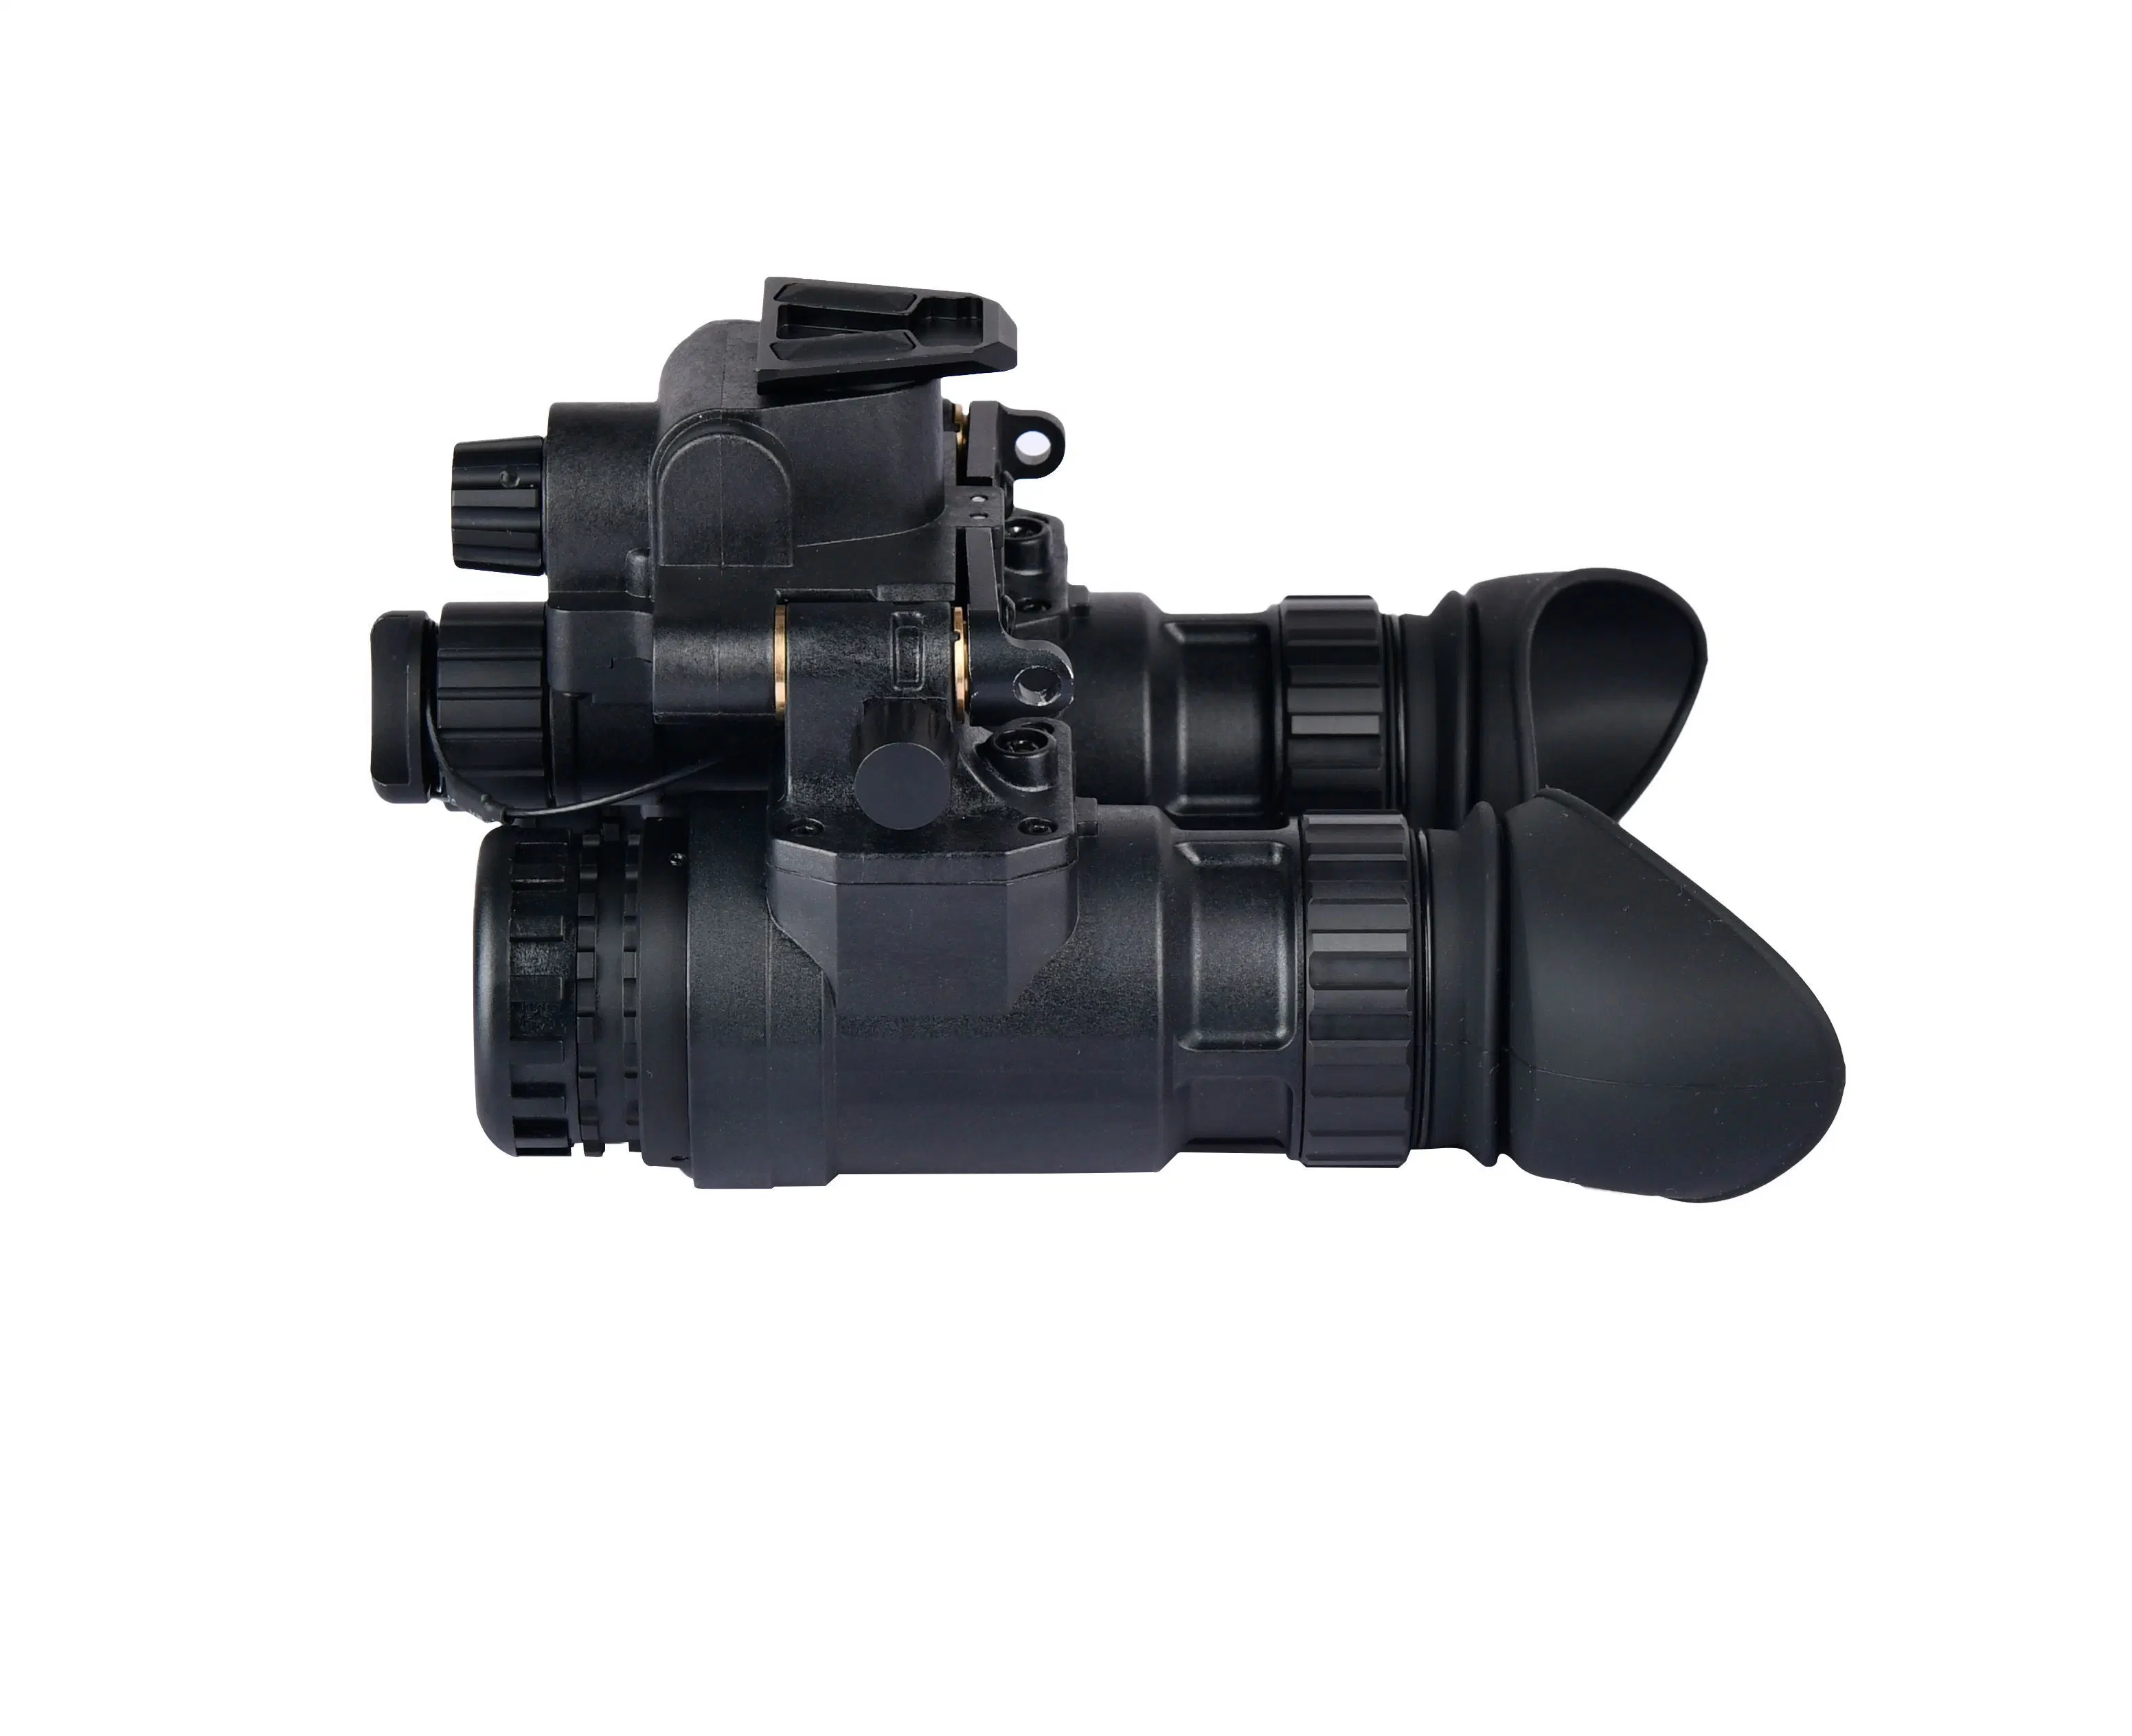 High Cost Performance HD Super Large Fov50/40 Night Vision